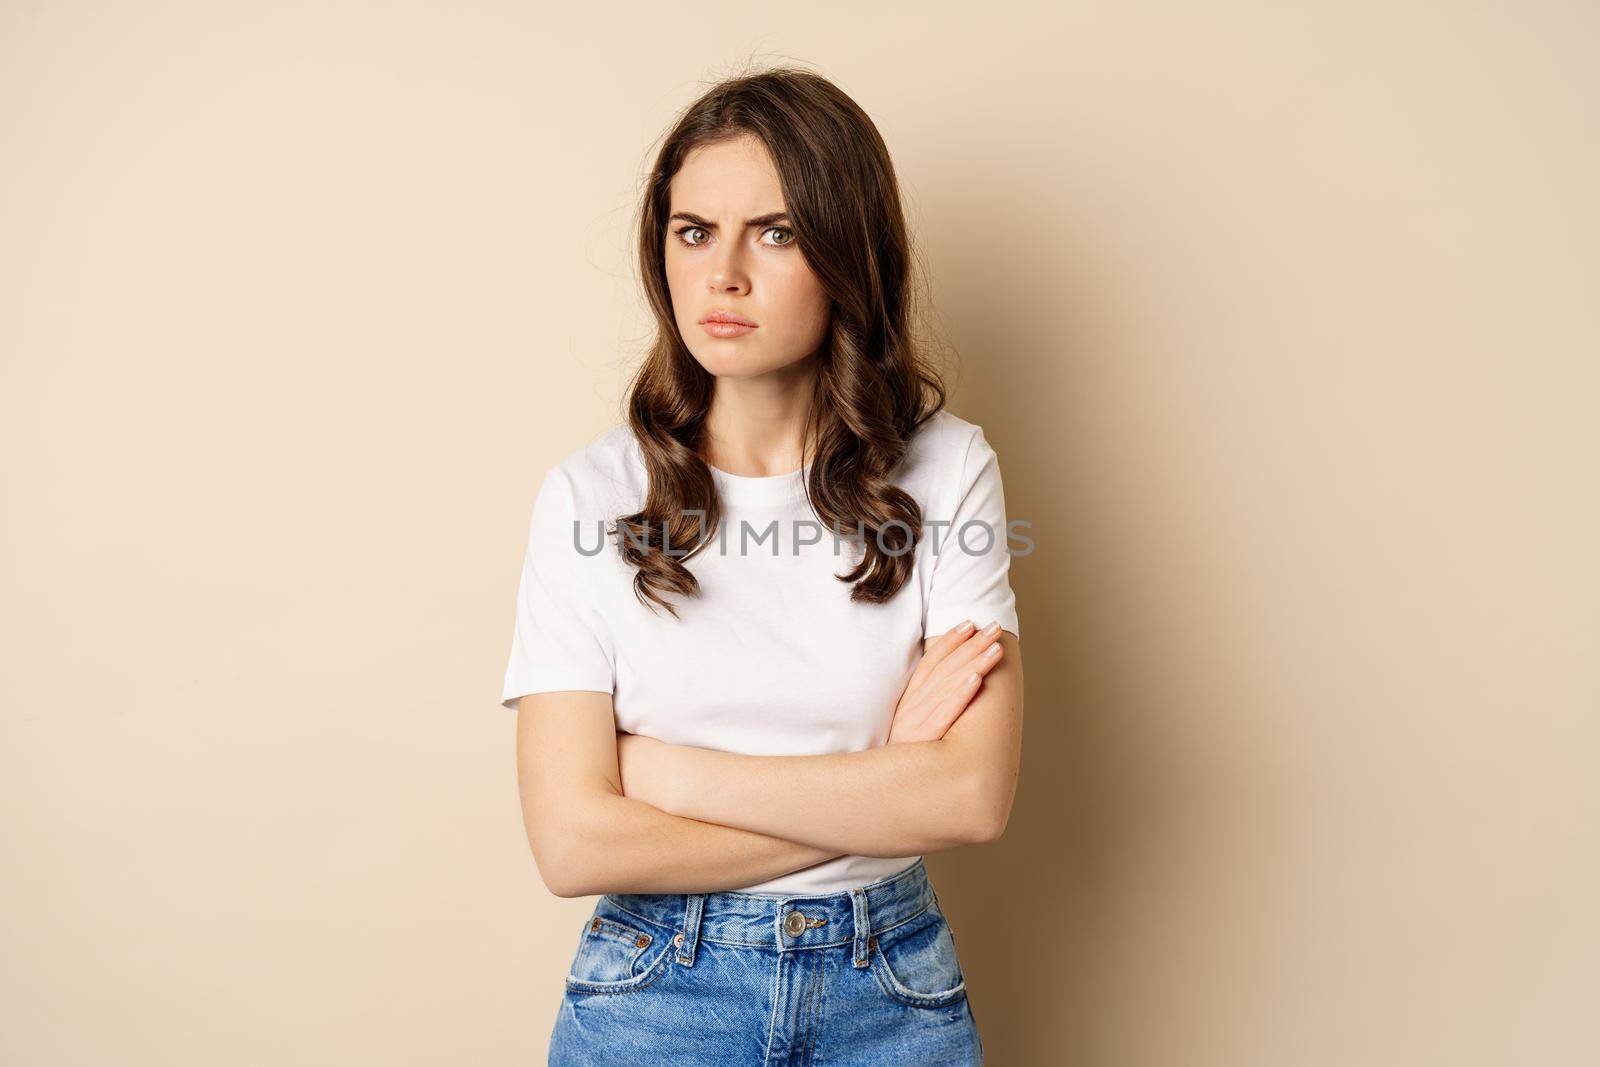 Offended angry woman cross hands on chest, frowning and sulking insulted, standing over beige background.